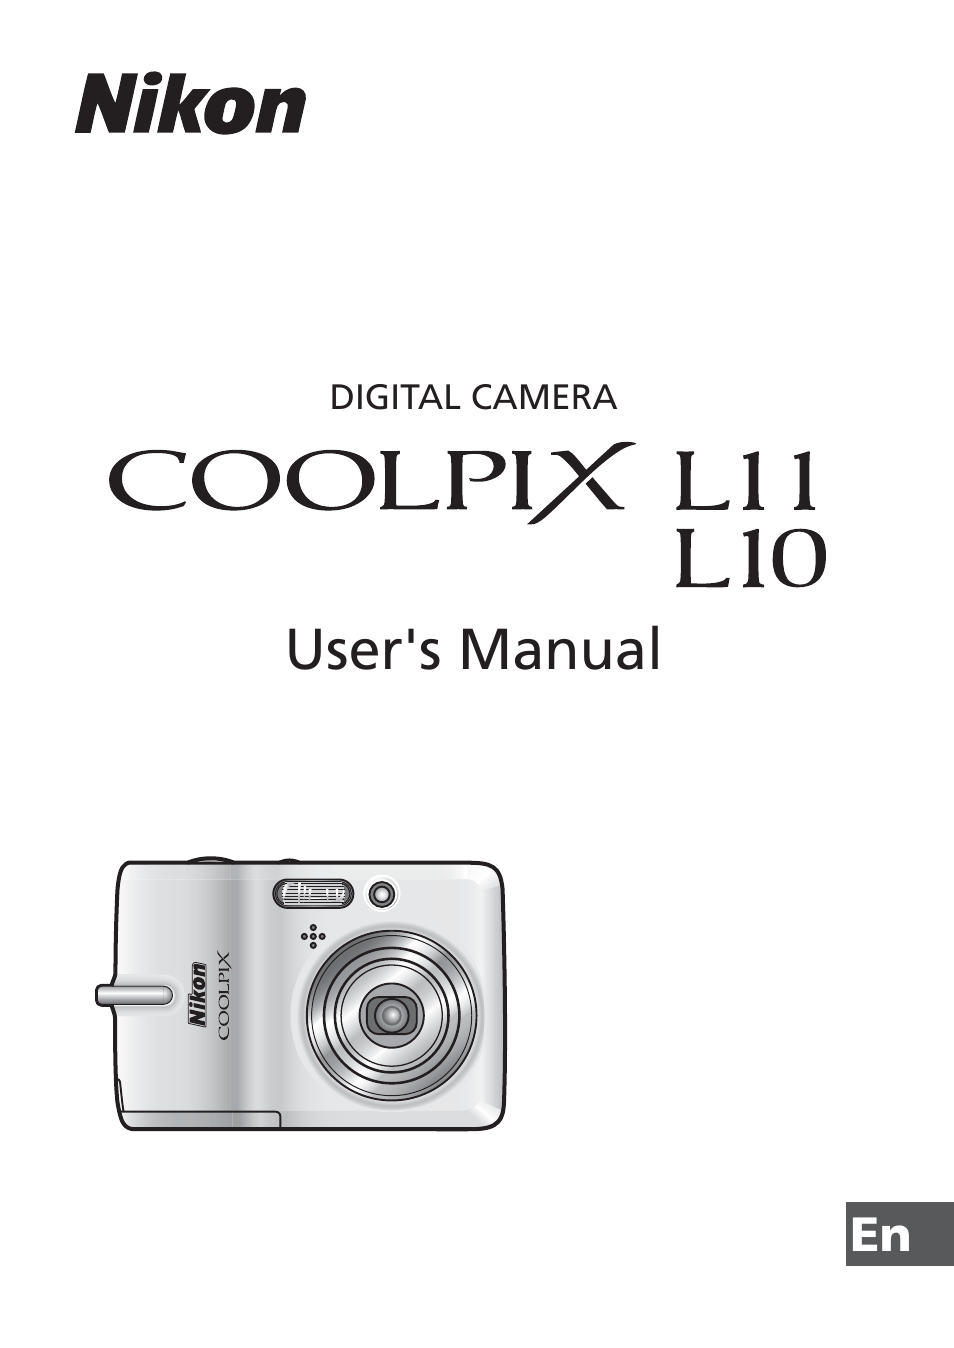 Nikon Coolpix L10 User Manual | 135 pages | Also for: Coolpix L11